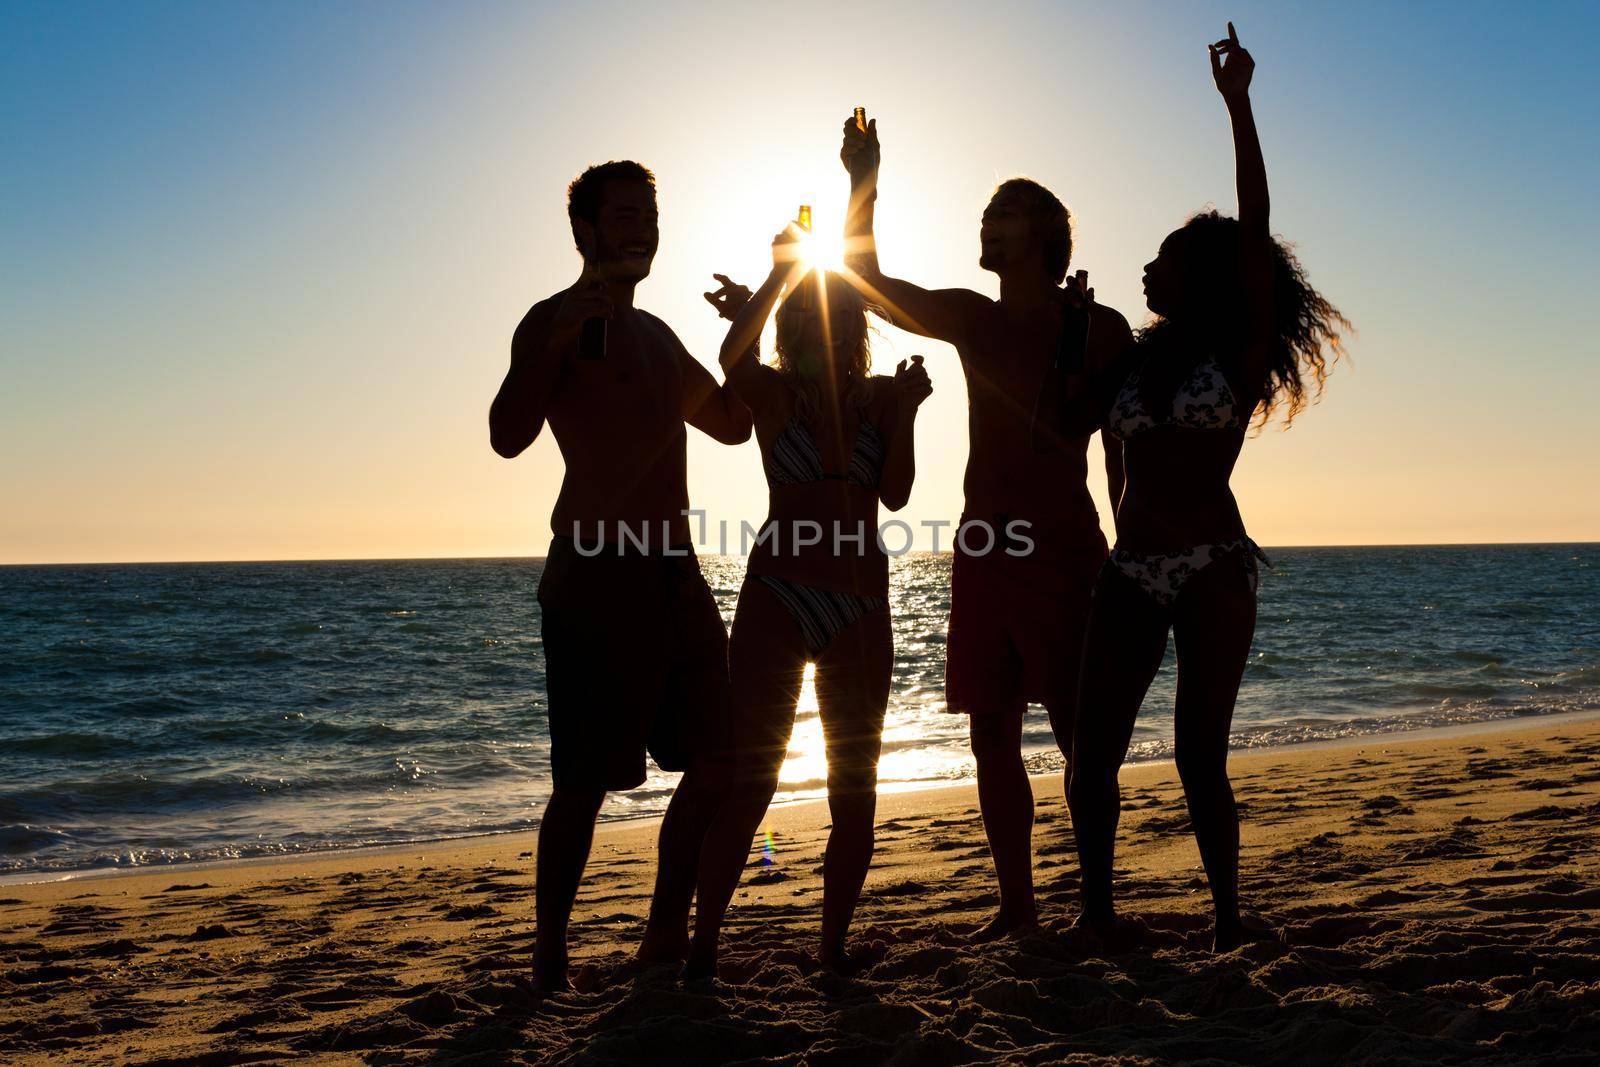 People (two couples) on the beach having a party, drinking and having a lot of fun in the sunset (only silhouette of people to be seen, people having bottles in their hands with the sun shining through)